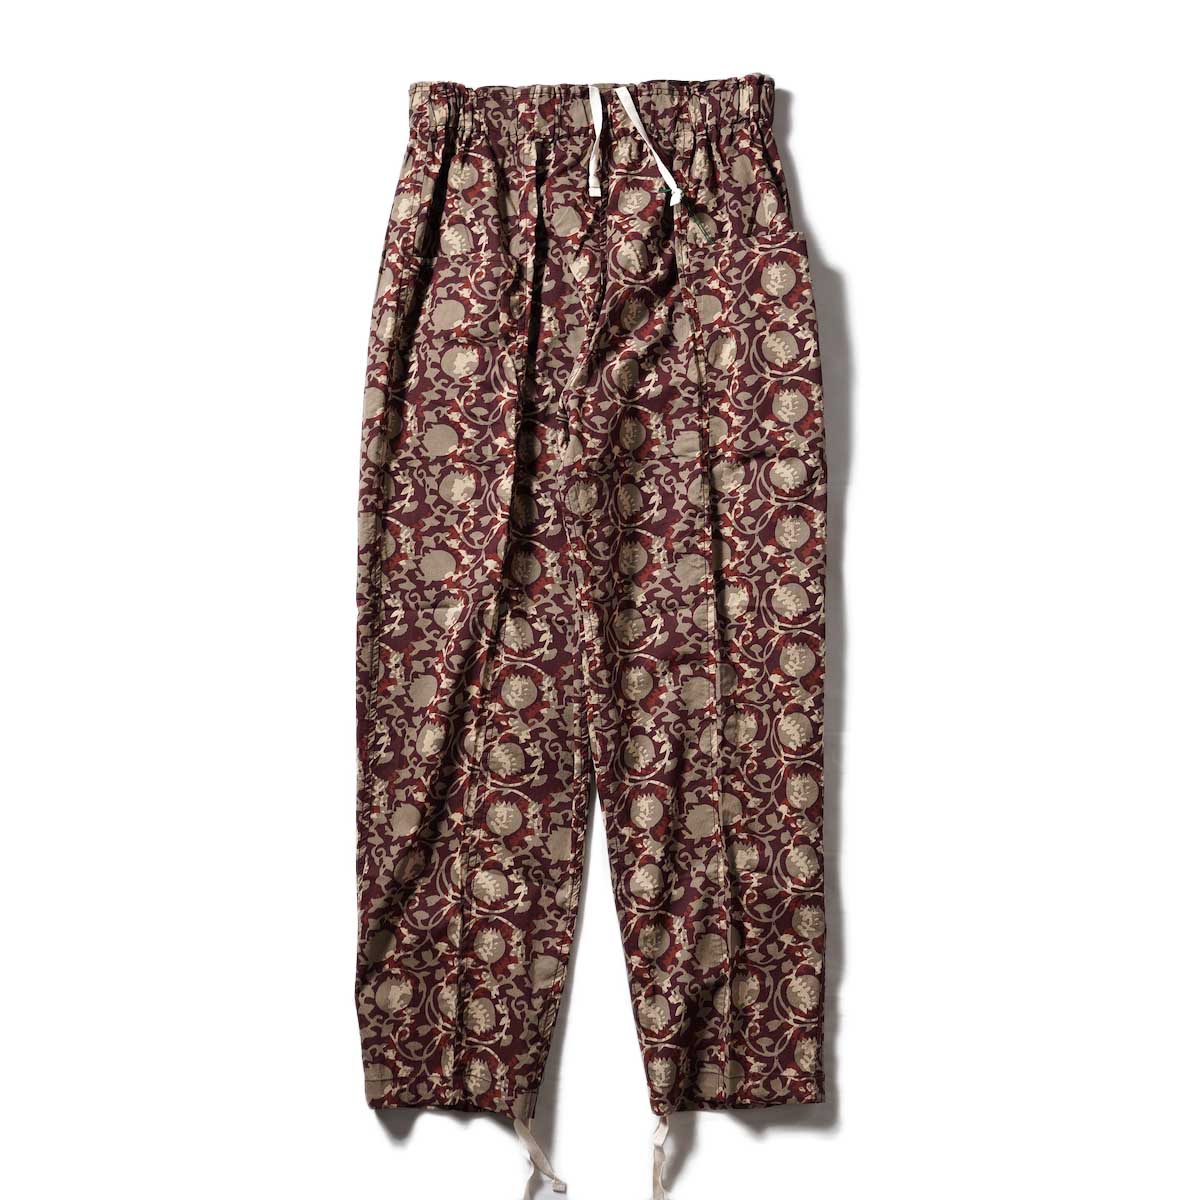 South2 West8 / Army String Pant - Batic PT. / BOTANICAL (Tany/Wine)